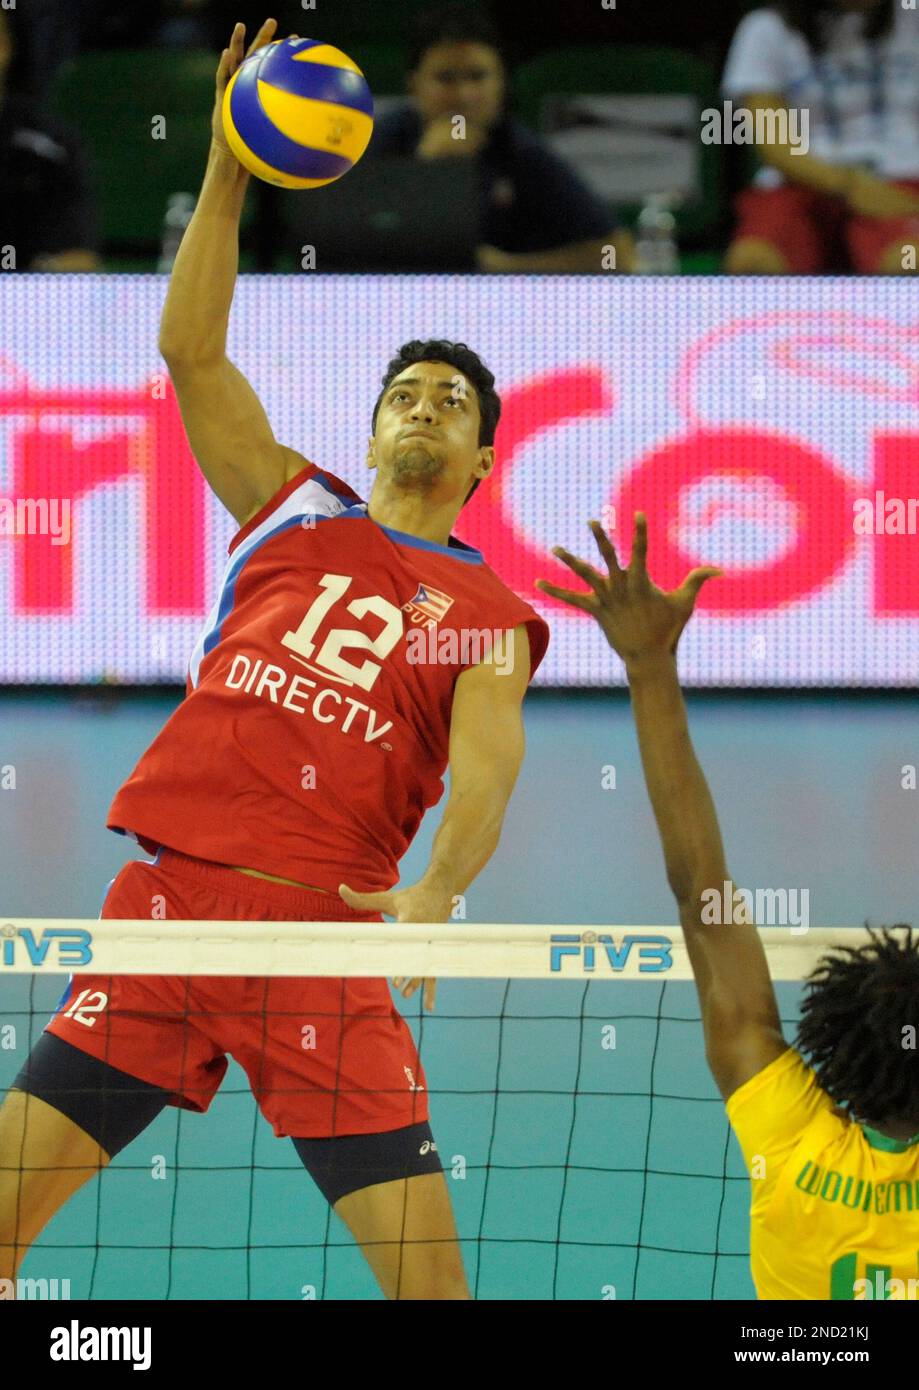 Hector Soto, left, of Puerto Rico, hits past the Dominican Republic defense during their semifinal match in the volleyball competition of the Central American and Caribbean Games in Cartagena, Colombia, Friday, July